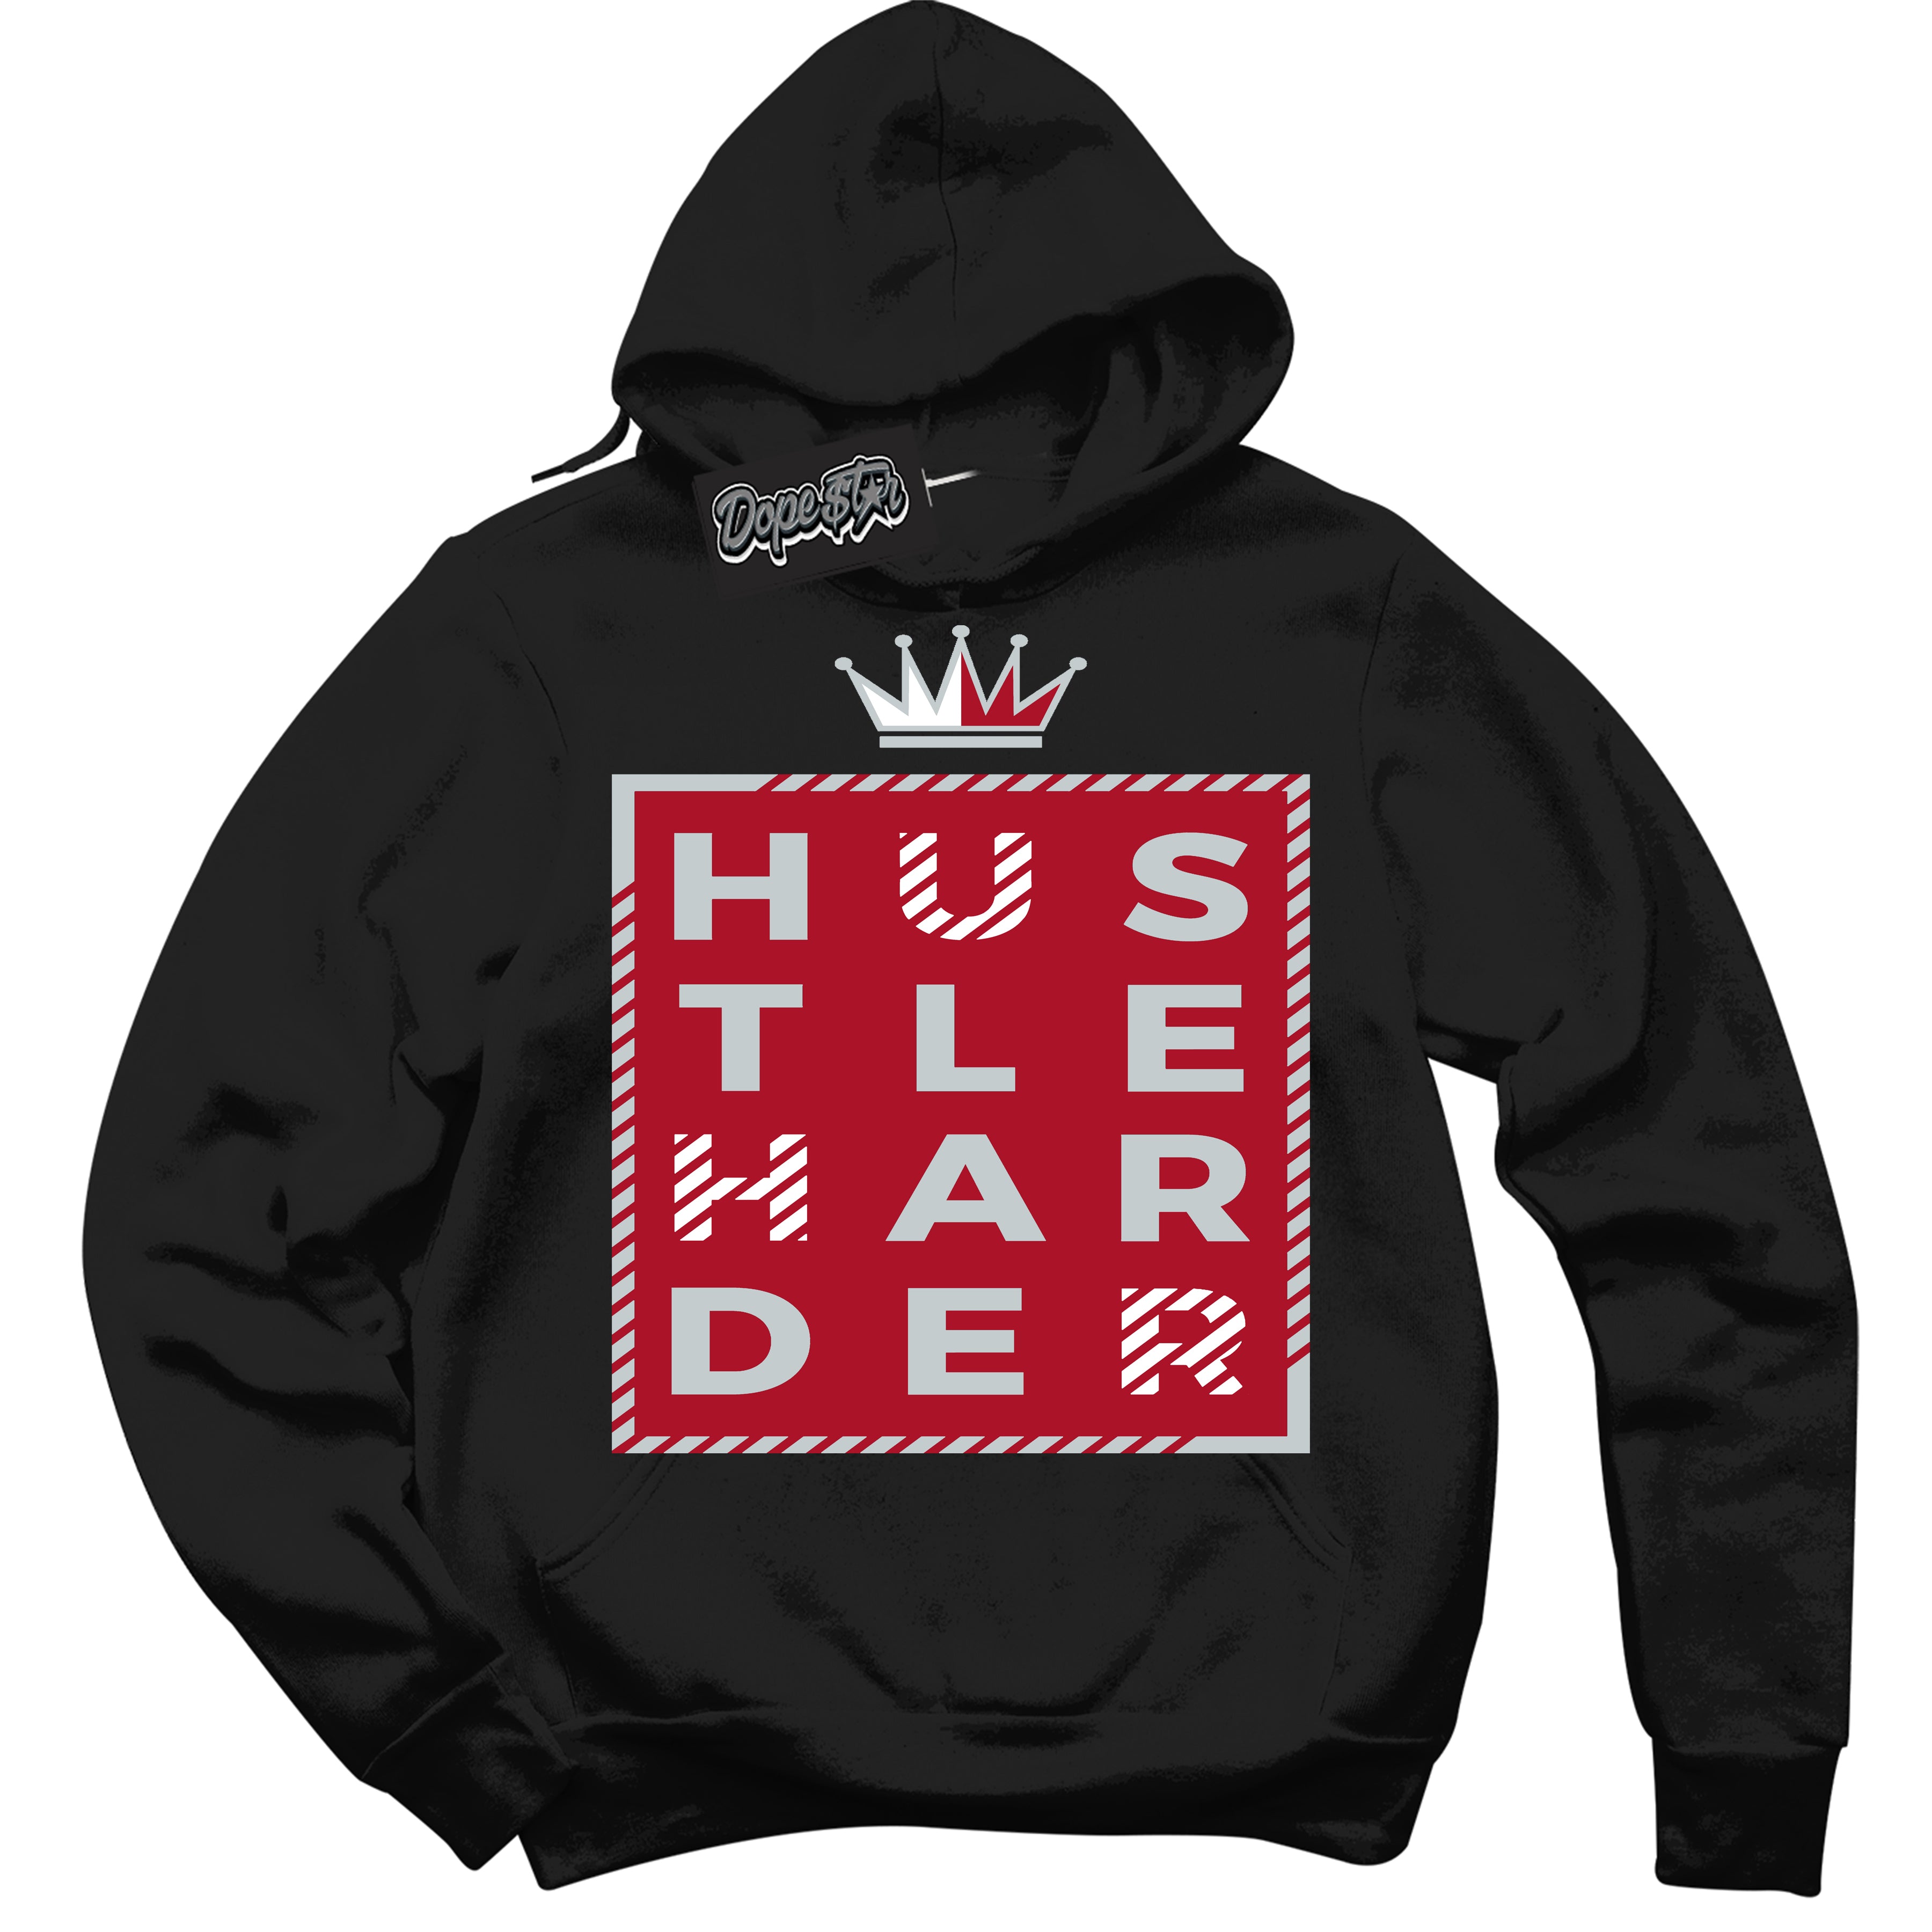 Cool Black Hoodie with “ Hustle Harder ”  design that Perfectly Matches  Reverse Ultraman Sneakers.